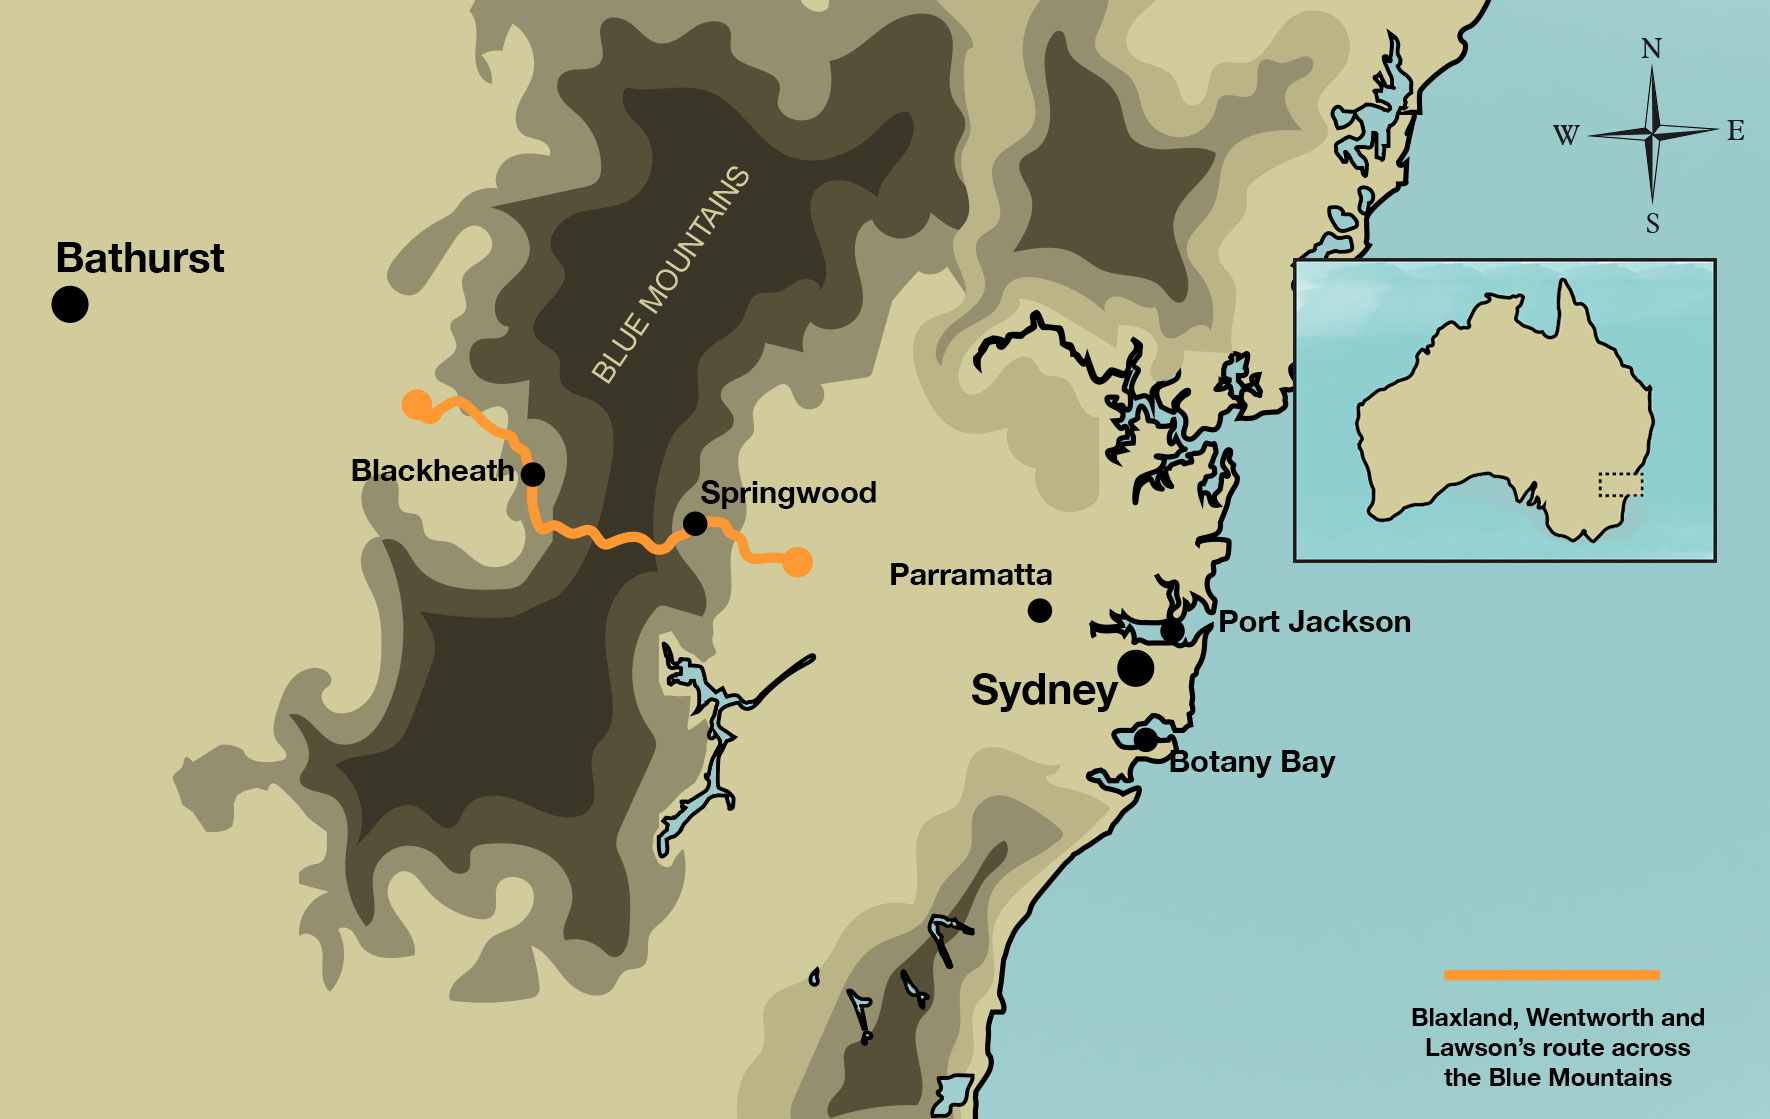 Map showing 1813 route across the Blue Mountains.